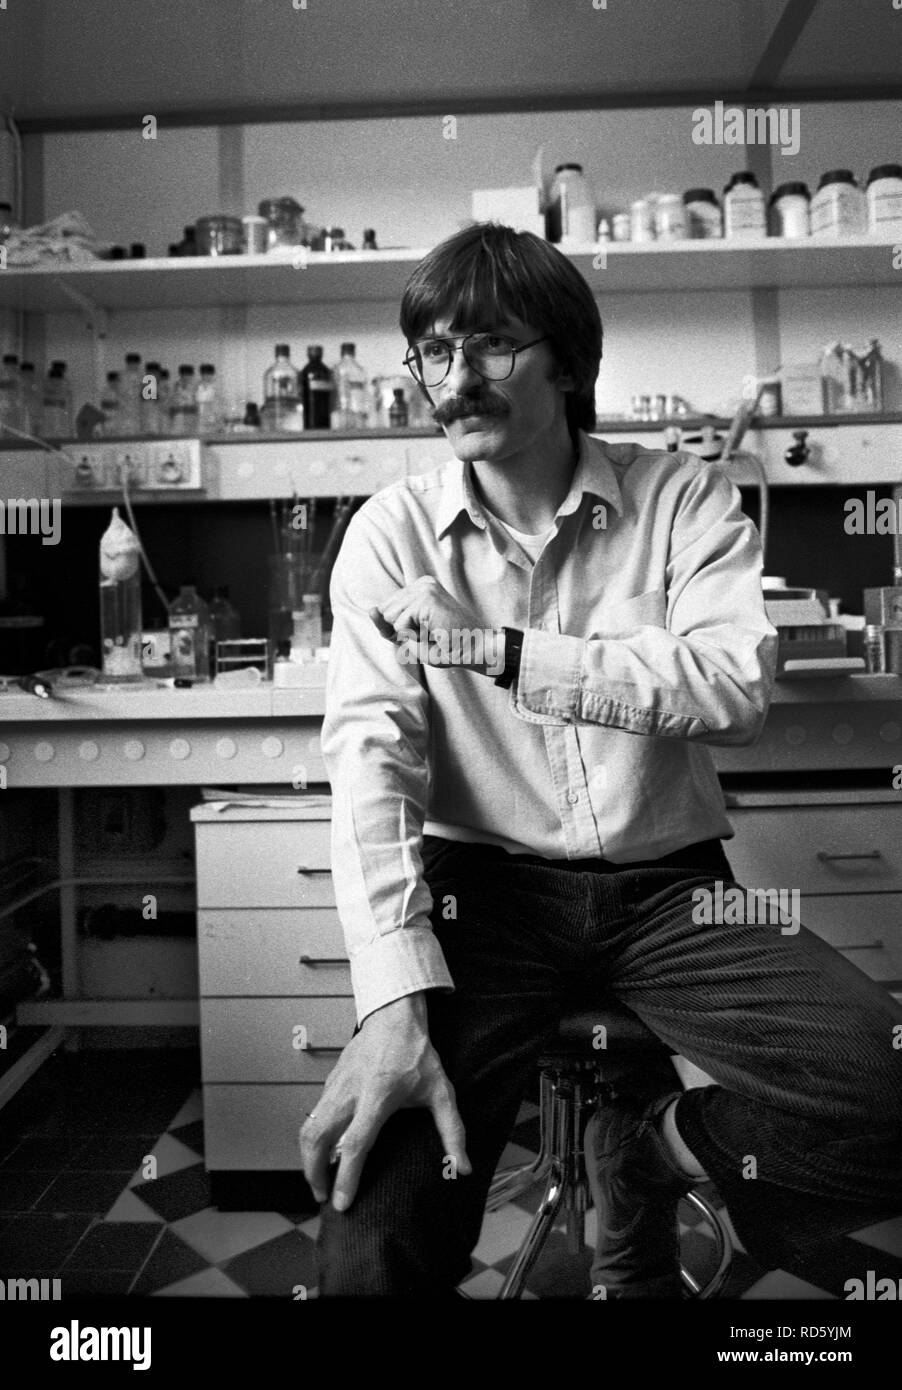 Professor Simon Wain-Hobson Pasteur Institute Institut Pasteur, Paris France 1980s.  He is a member of  Montagniers team identifying the AIDS virus and finding a cure for HIV AIDS  Looking for the AIDS virus. 1985.  He is now Professor of Molecular Retrovirology at the Pasteur Institute in Paris. HOMER SYKES Stock Photo